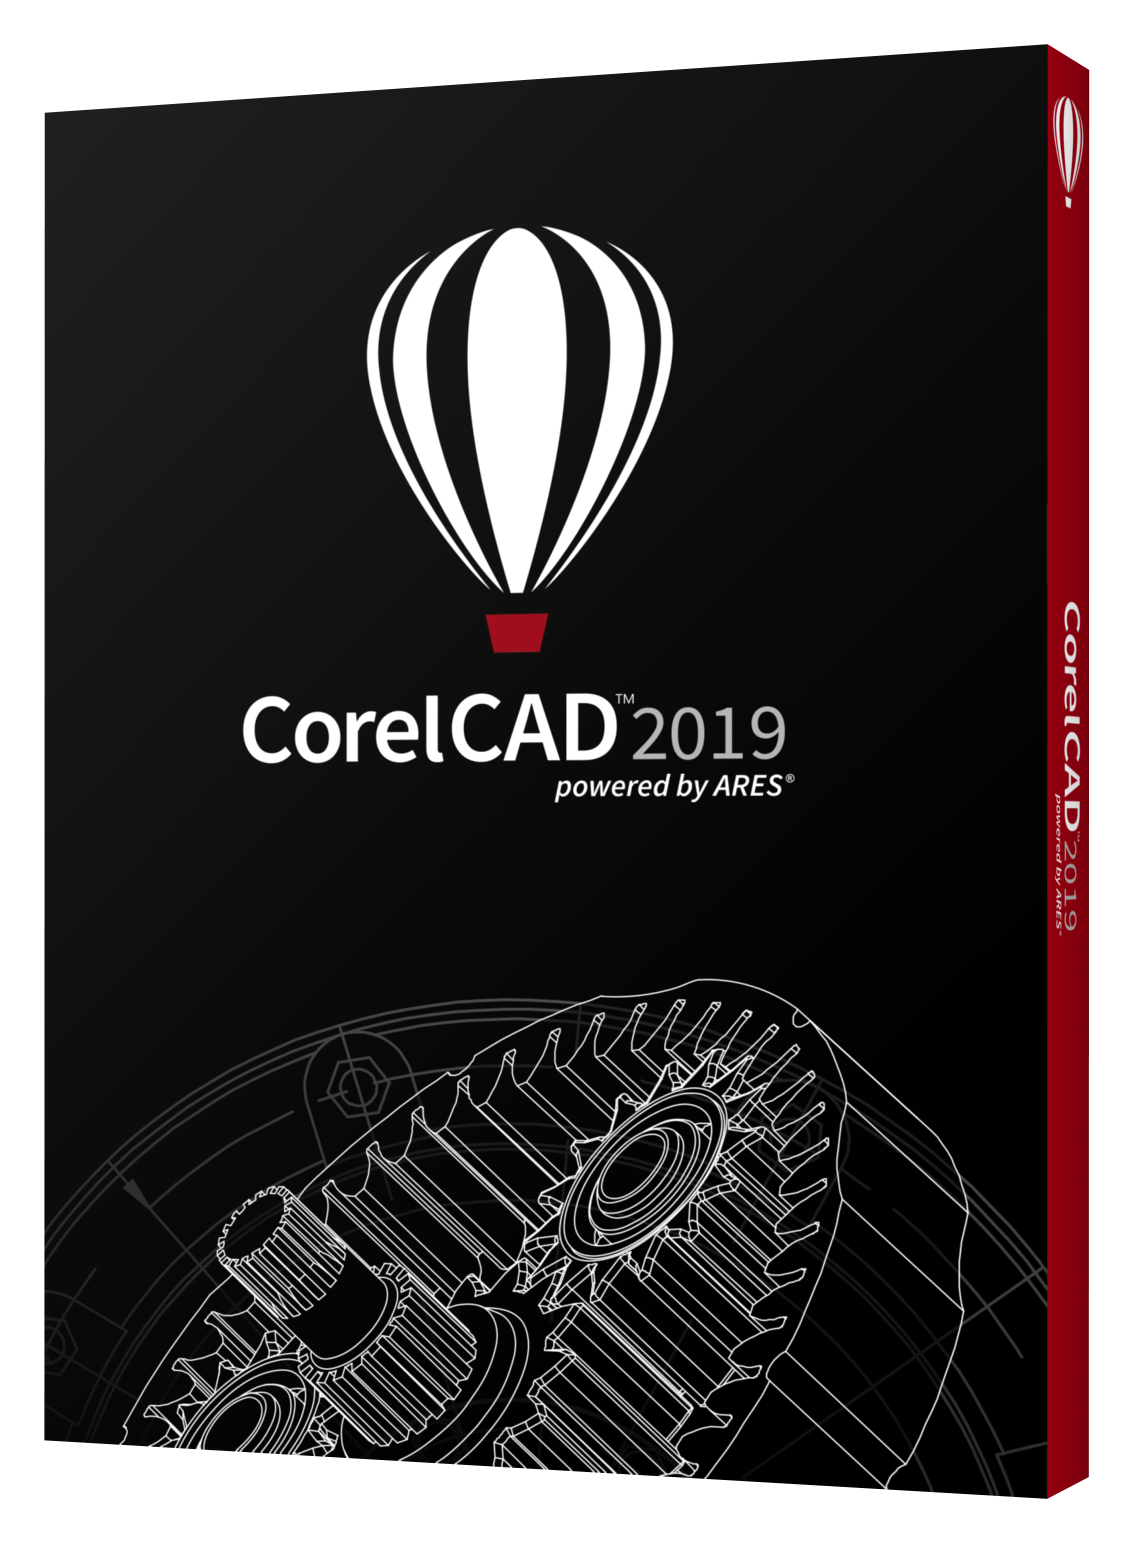 CorelCAD 2019 Speeds 2D Drawing, 3D Modeling, and Technical